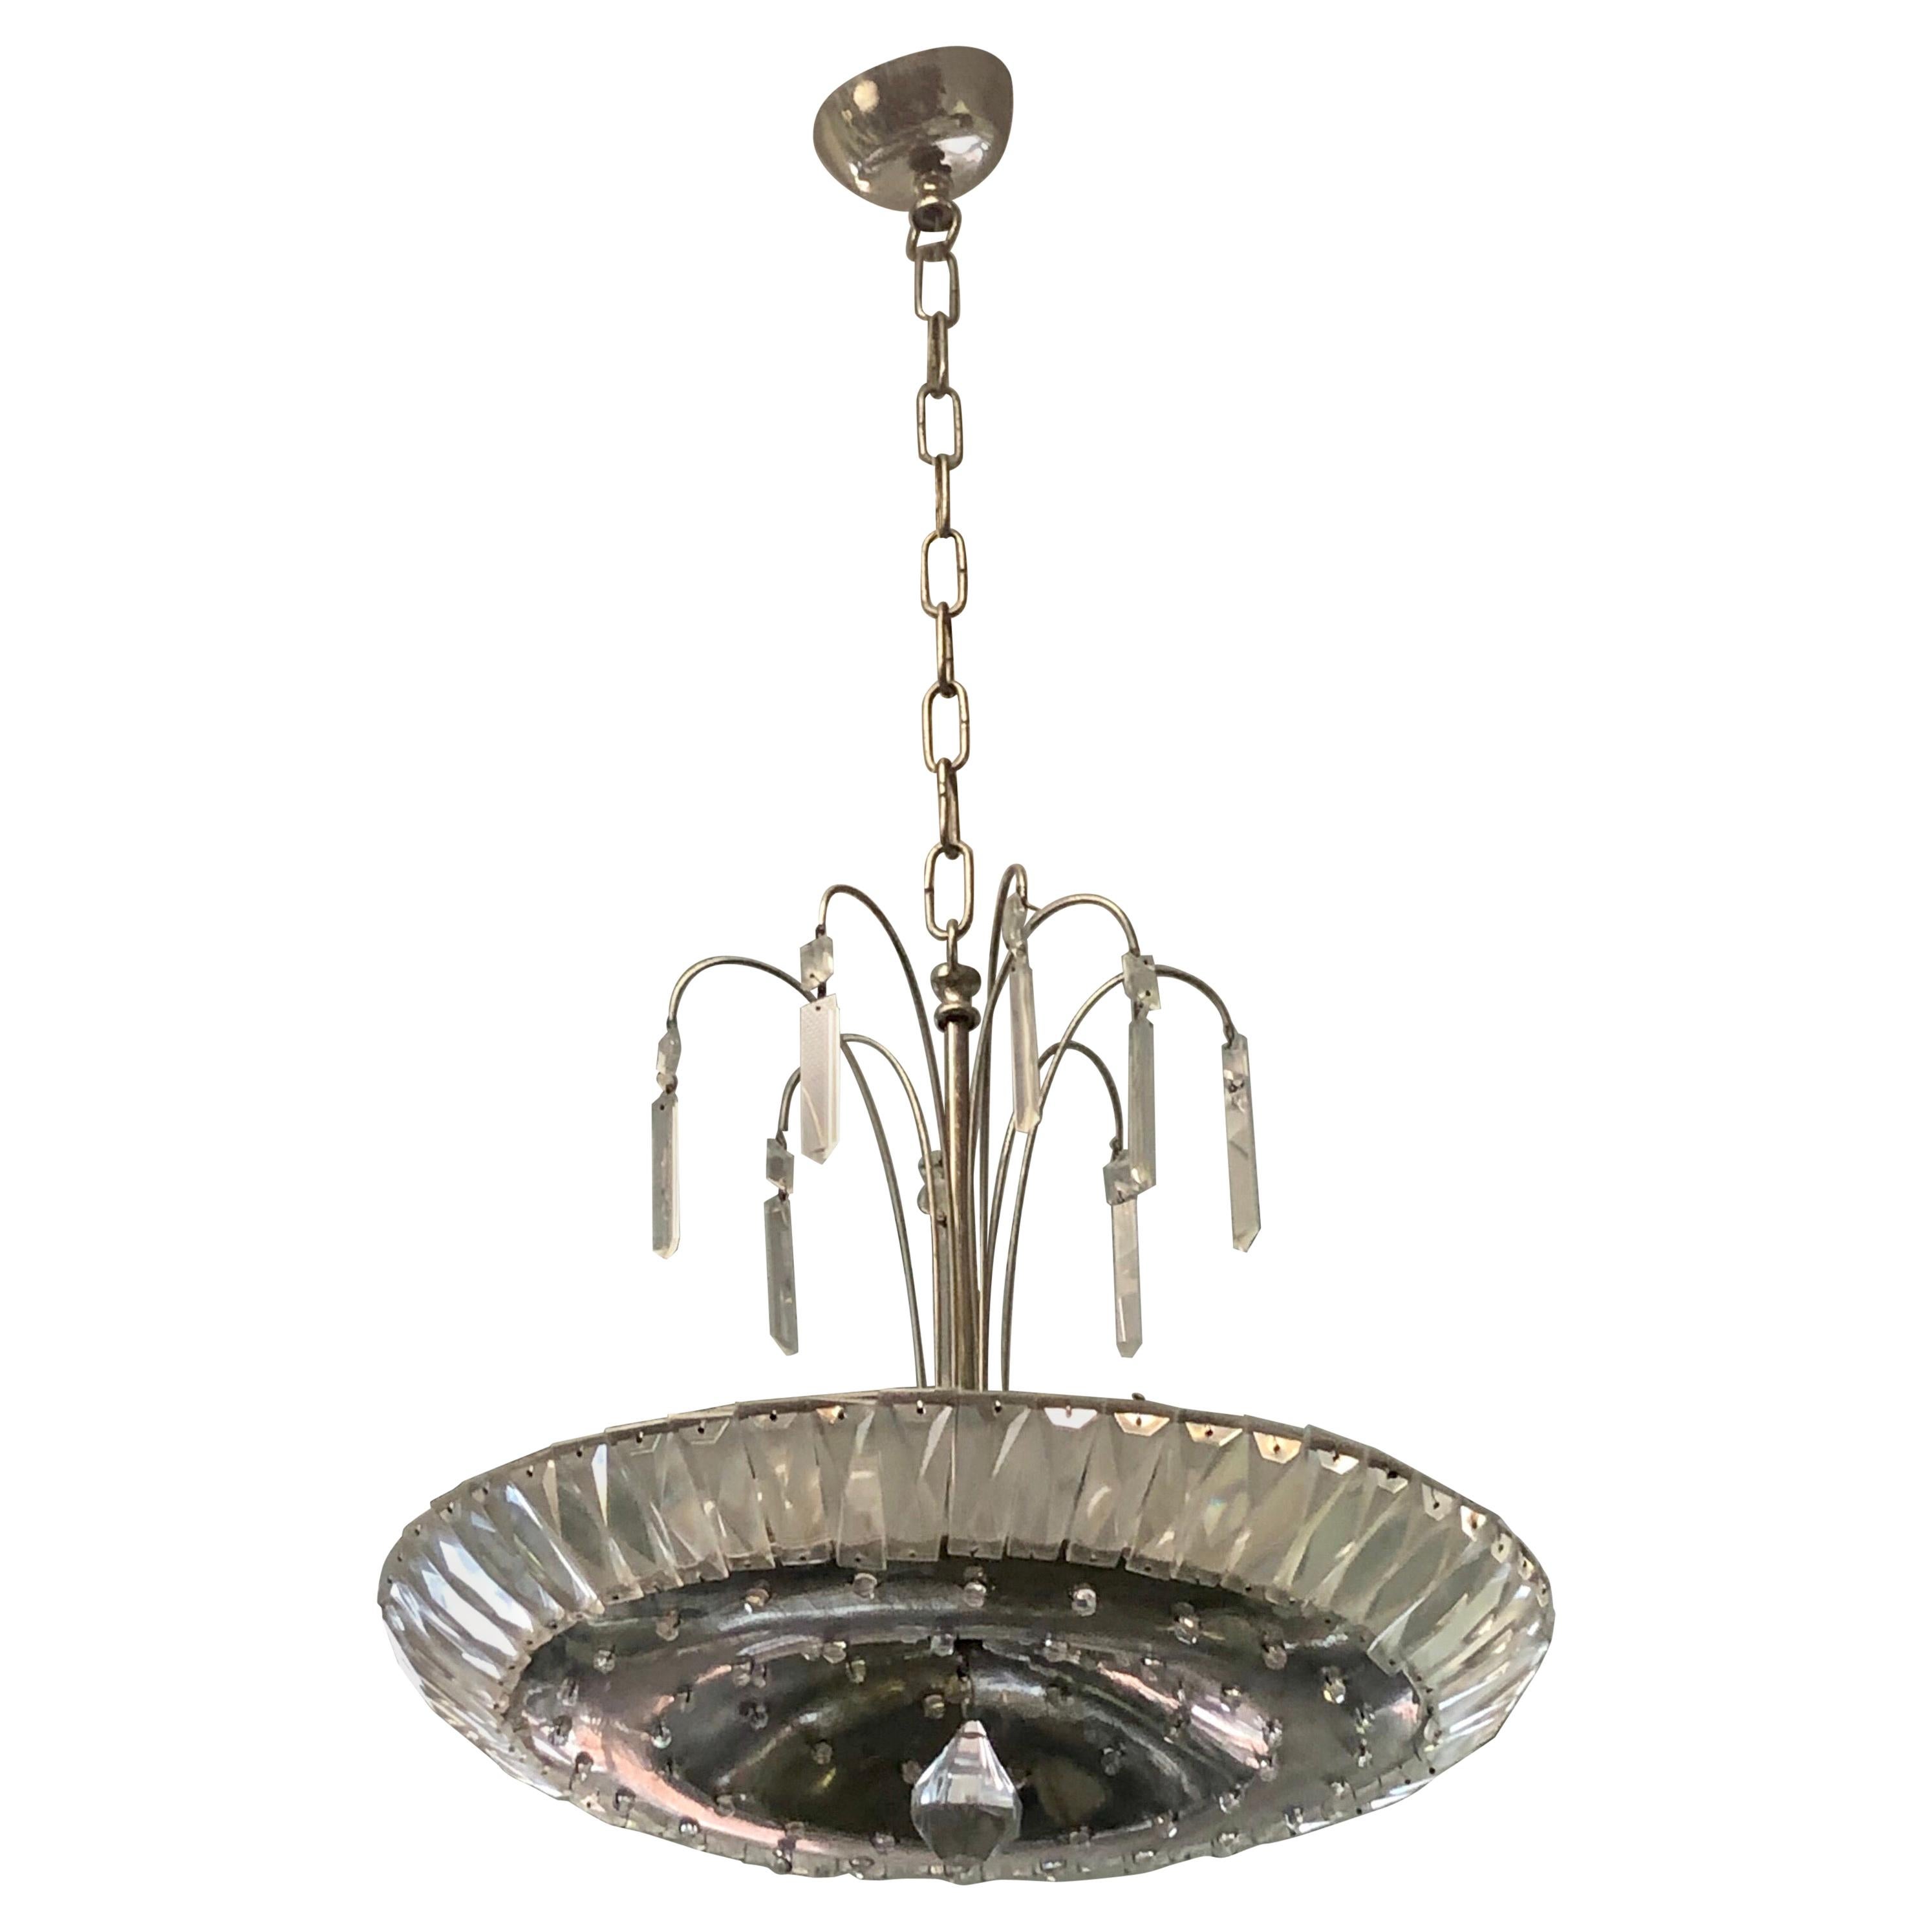 French Mid-Century Modern Neoclassical Nickel and Crystal Chandelier / Pendant